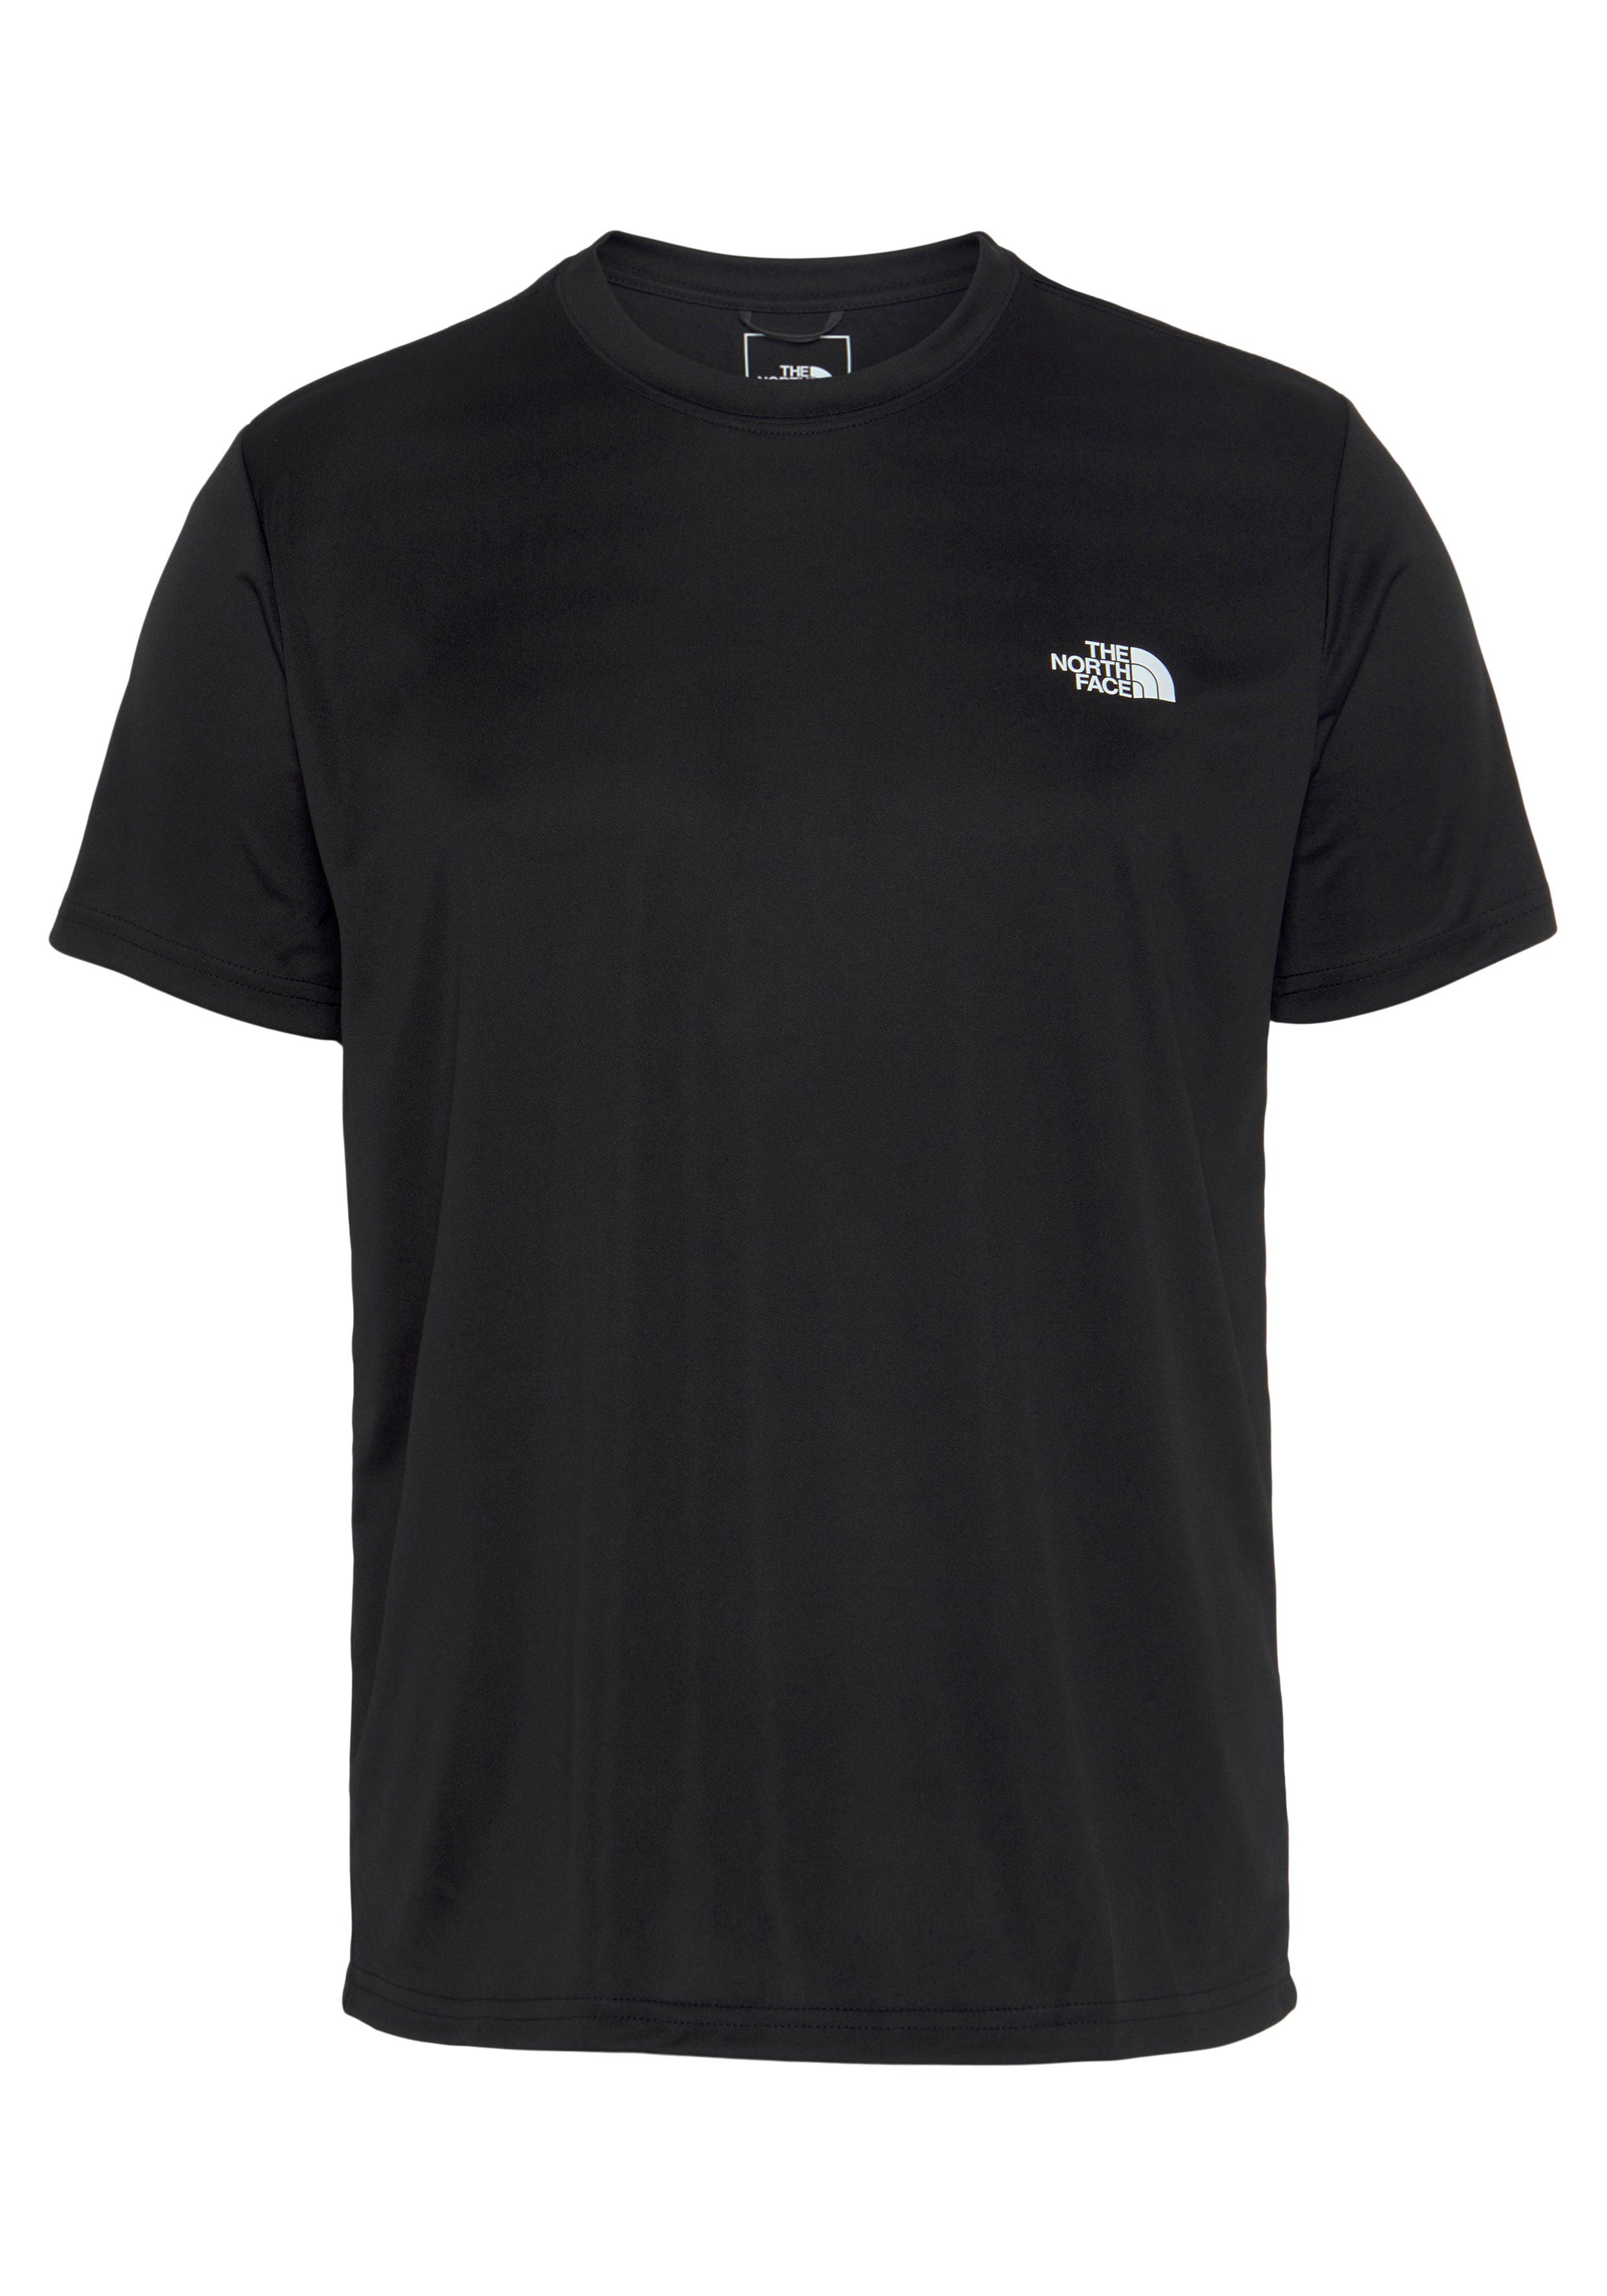 North AMP REAXION Funktionsshirt CREW black The tnf Face